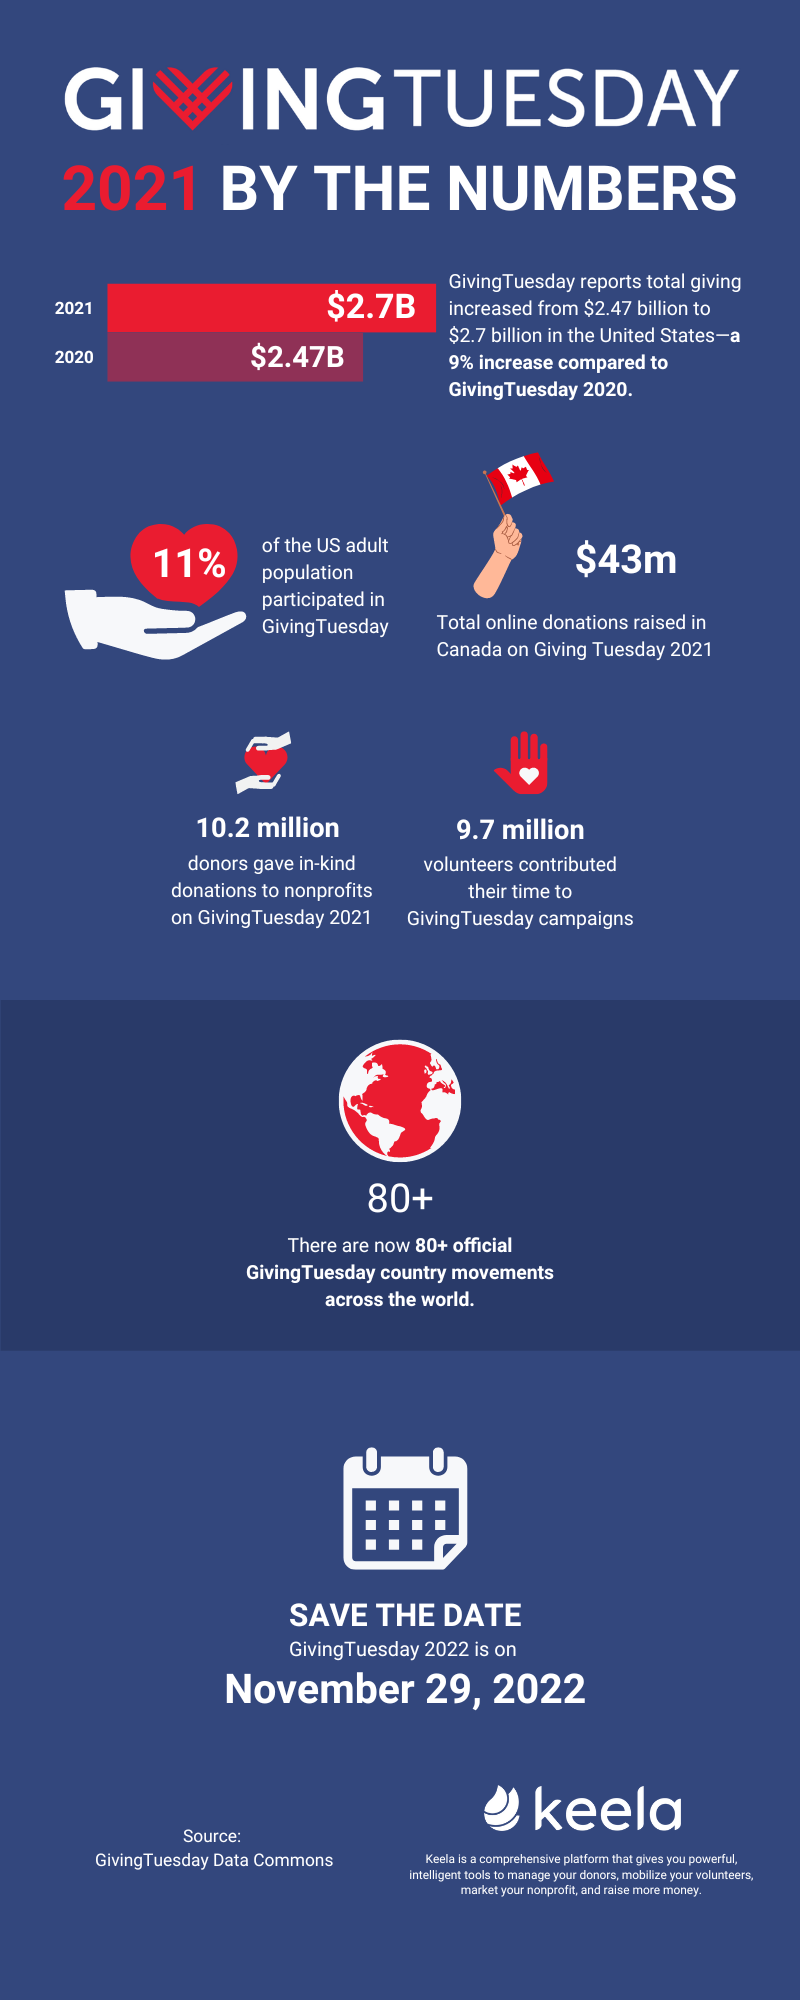 Giving Tuesday 2021 Results and Statistics [INFOGRAPHIC]